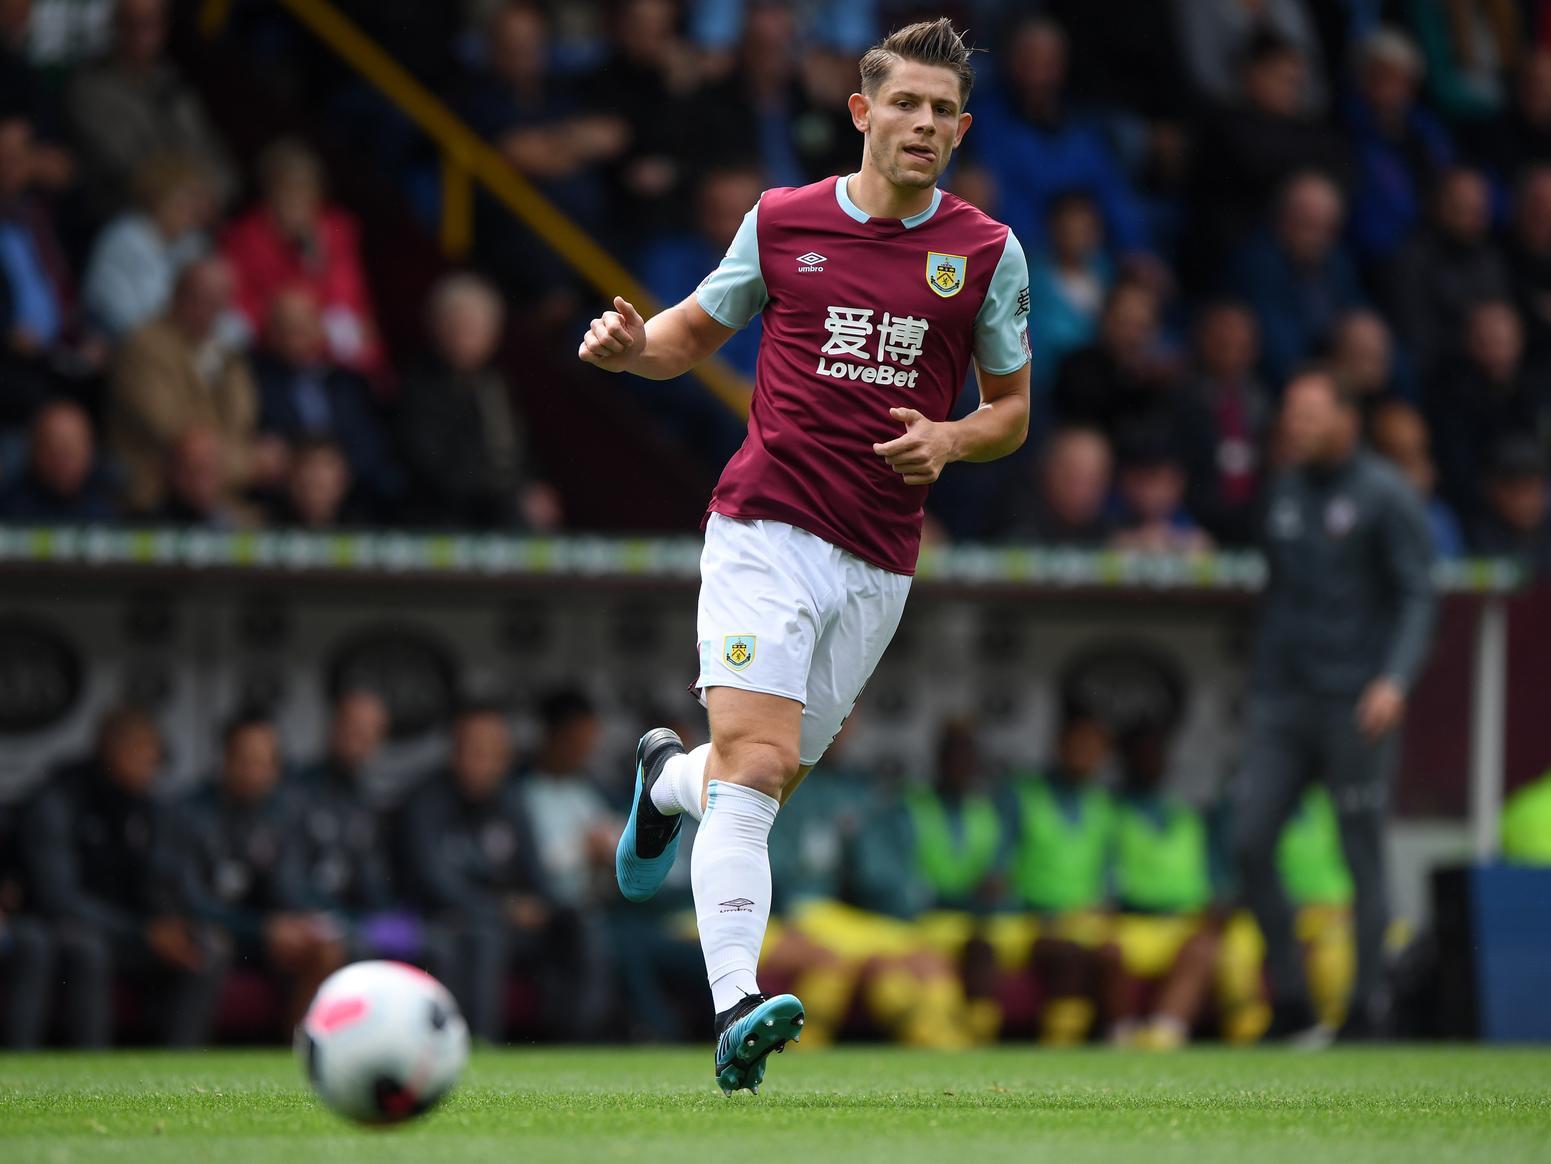 A relatively routine afternoon for the Clarets centre back, who was very rarely tested. Distribution poor on occasions, but blocked everything that was fired at him and won headers in all areas of the pitch.